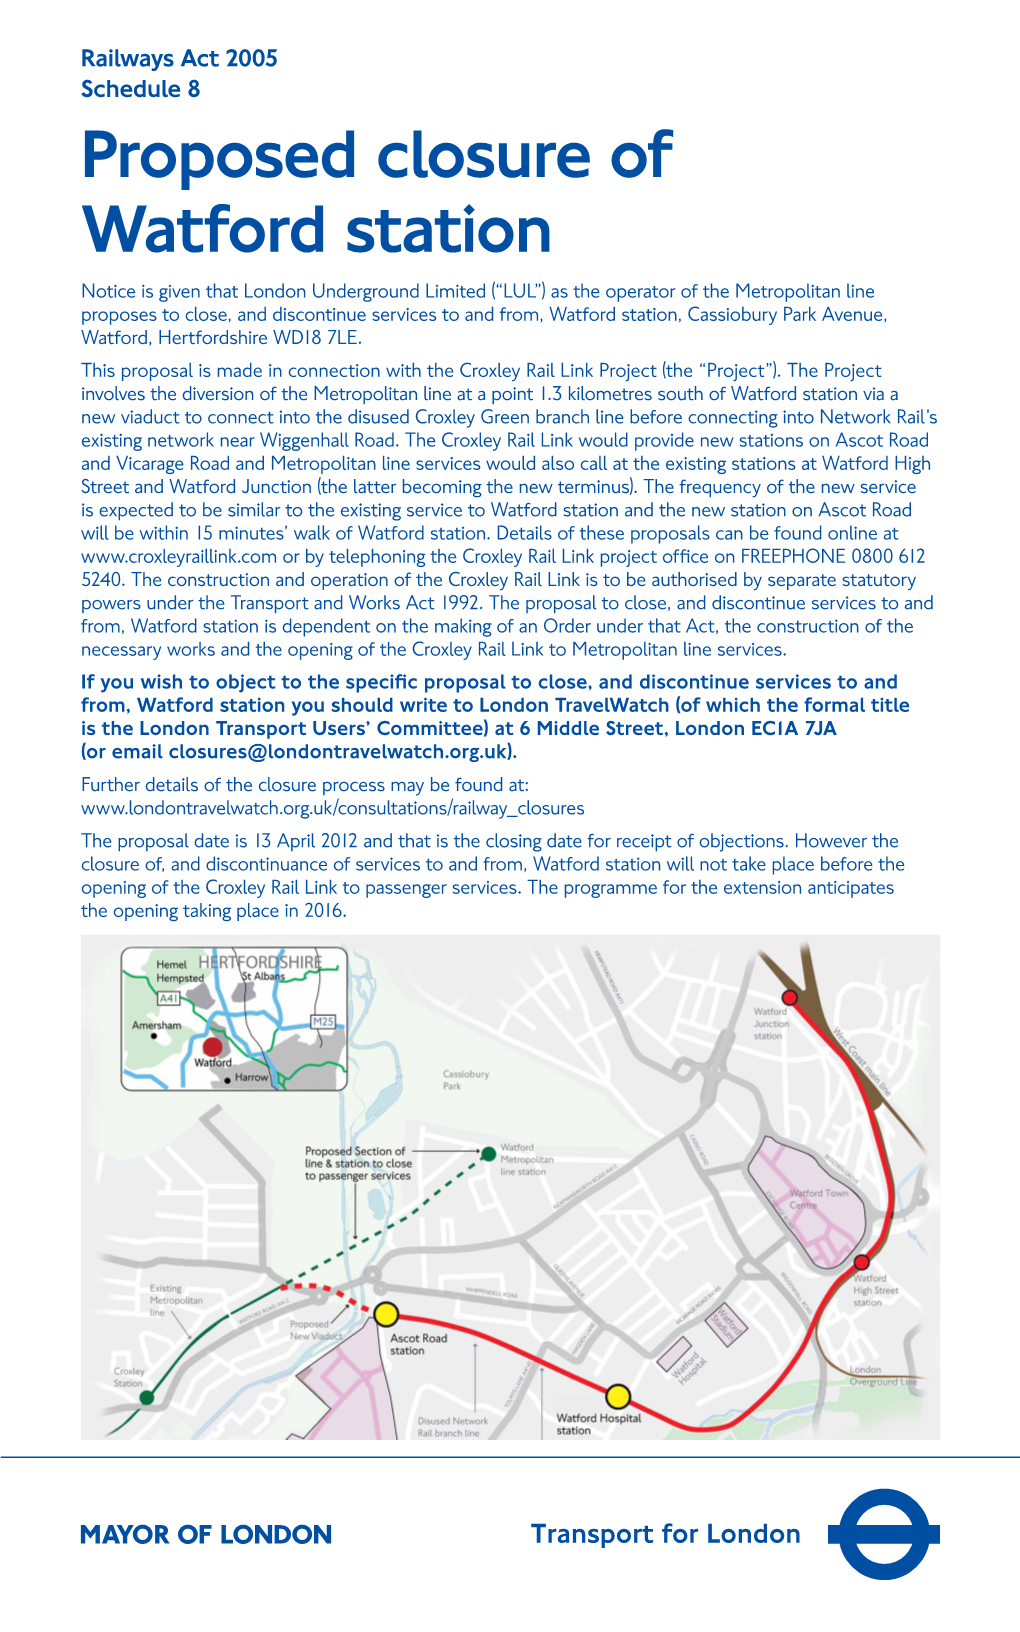 Proposed Closure of Watford Station